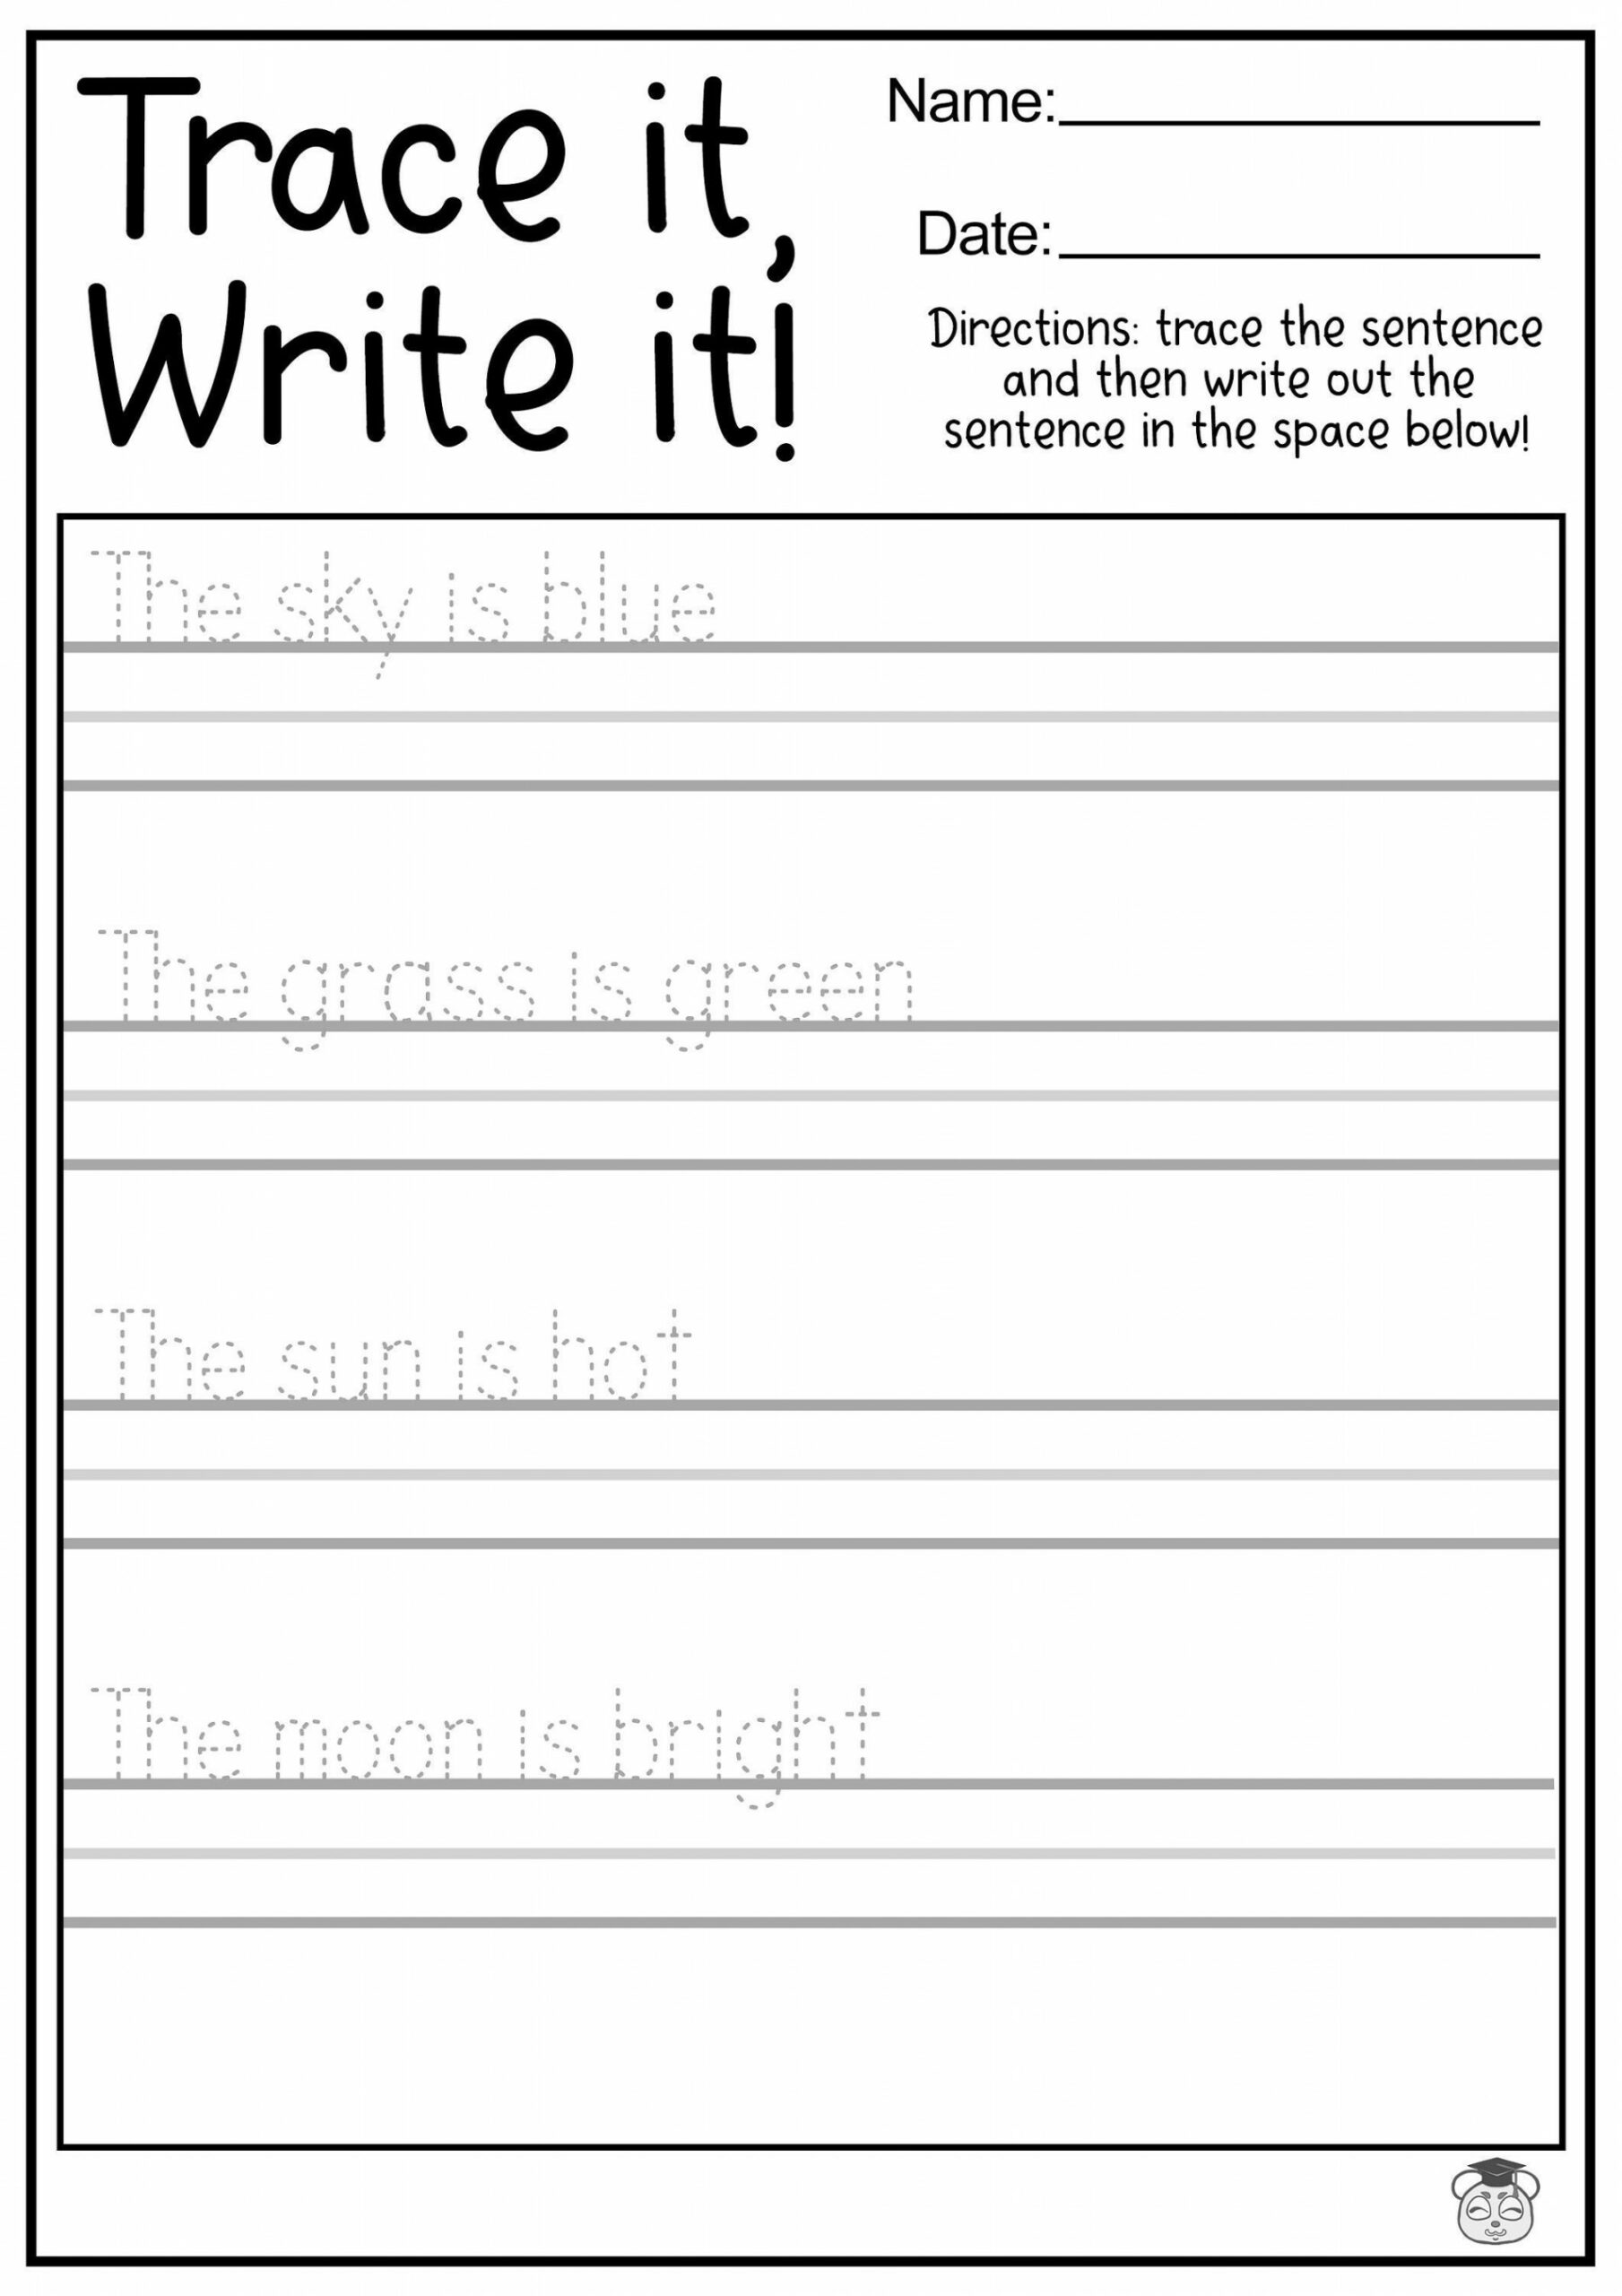 Printable Tracing and Writing English Worksheets Trace and